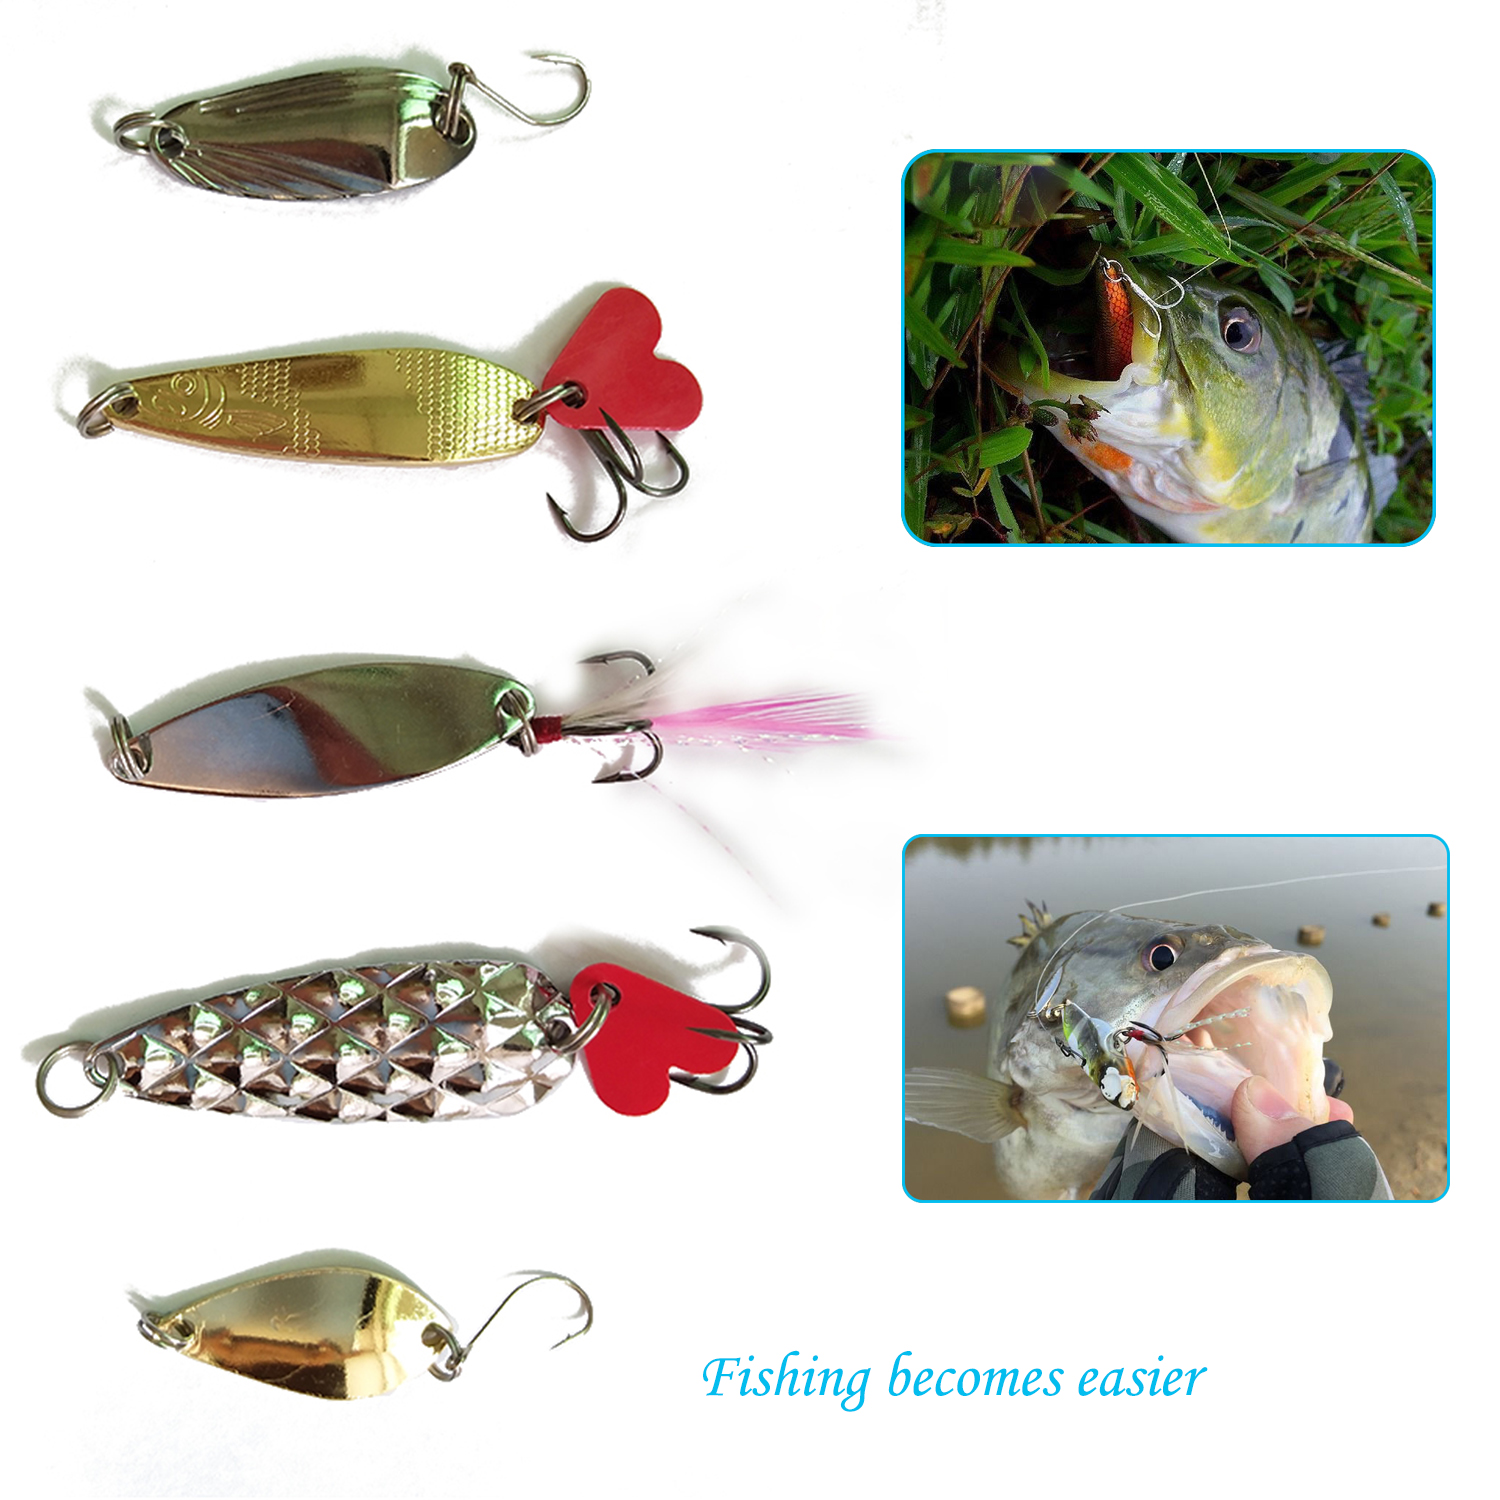 US$ 16.99 - 77Pcs Fishing Lures Kit Set for Bass,Trout,Salmon,Including  Spoon Lures ,Soft Plastic Worms, CrankBait,Jigs,Topwater Lures 